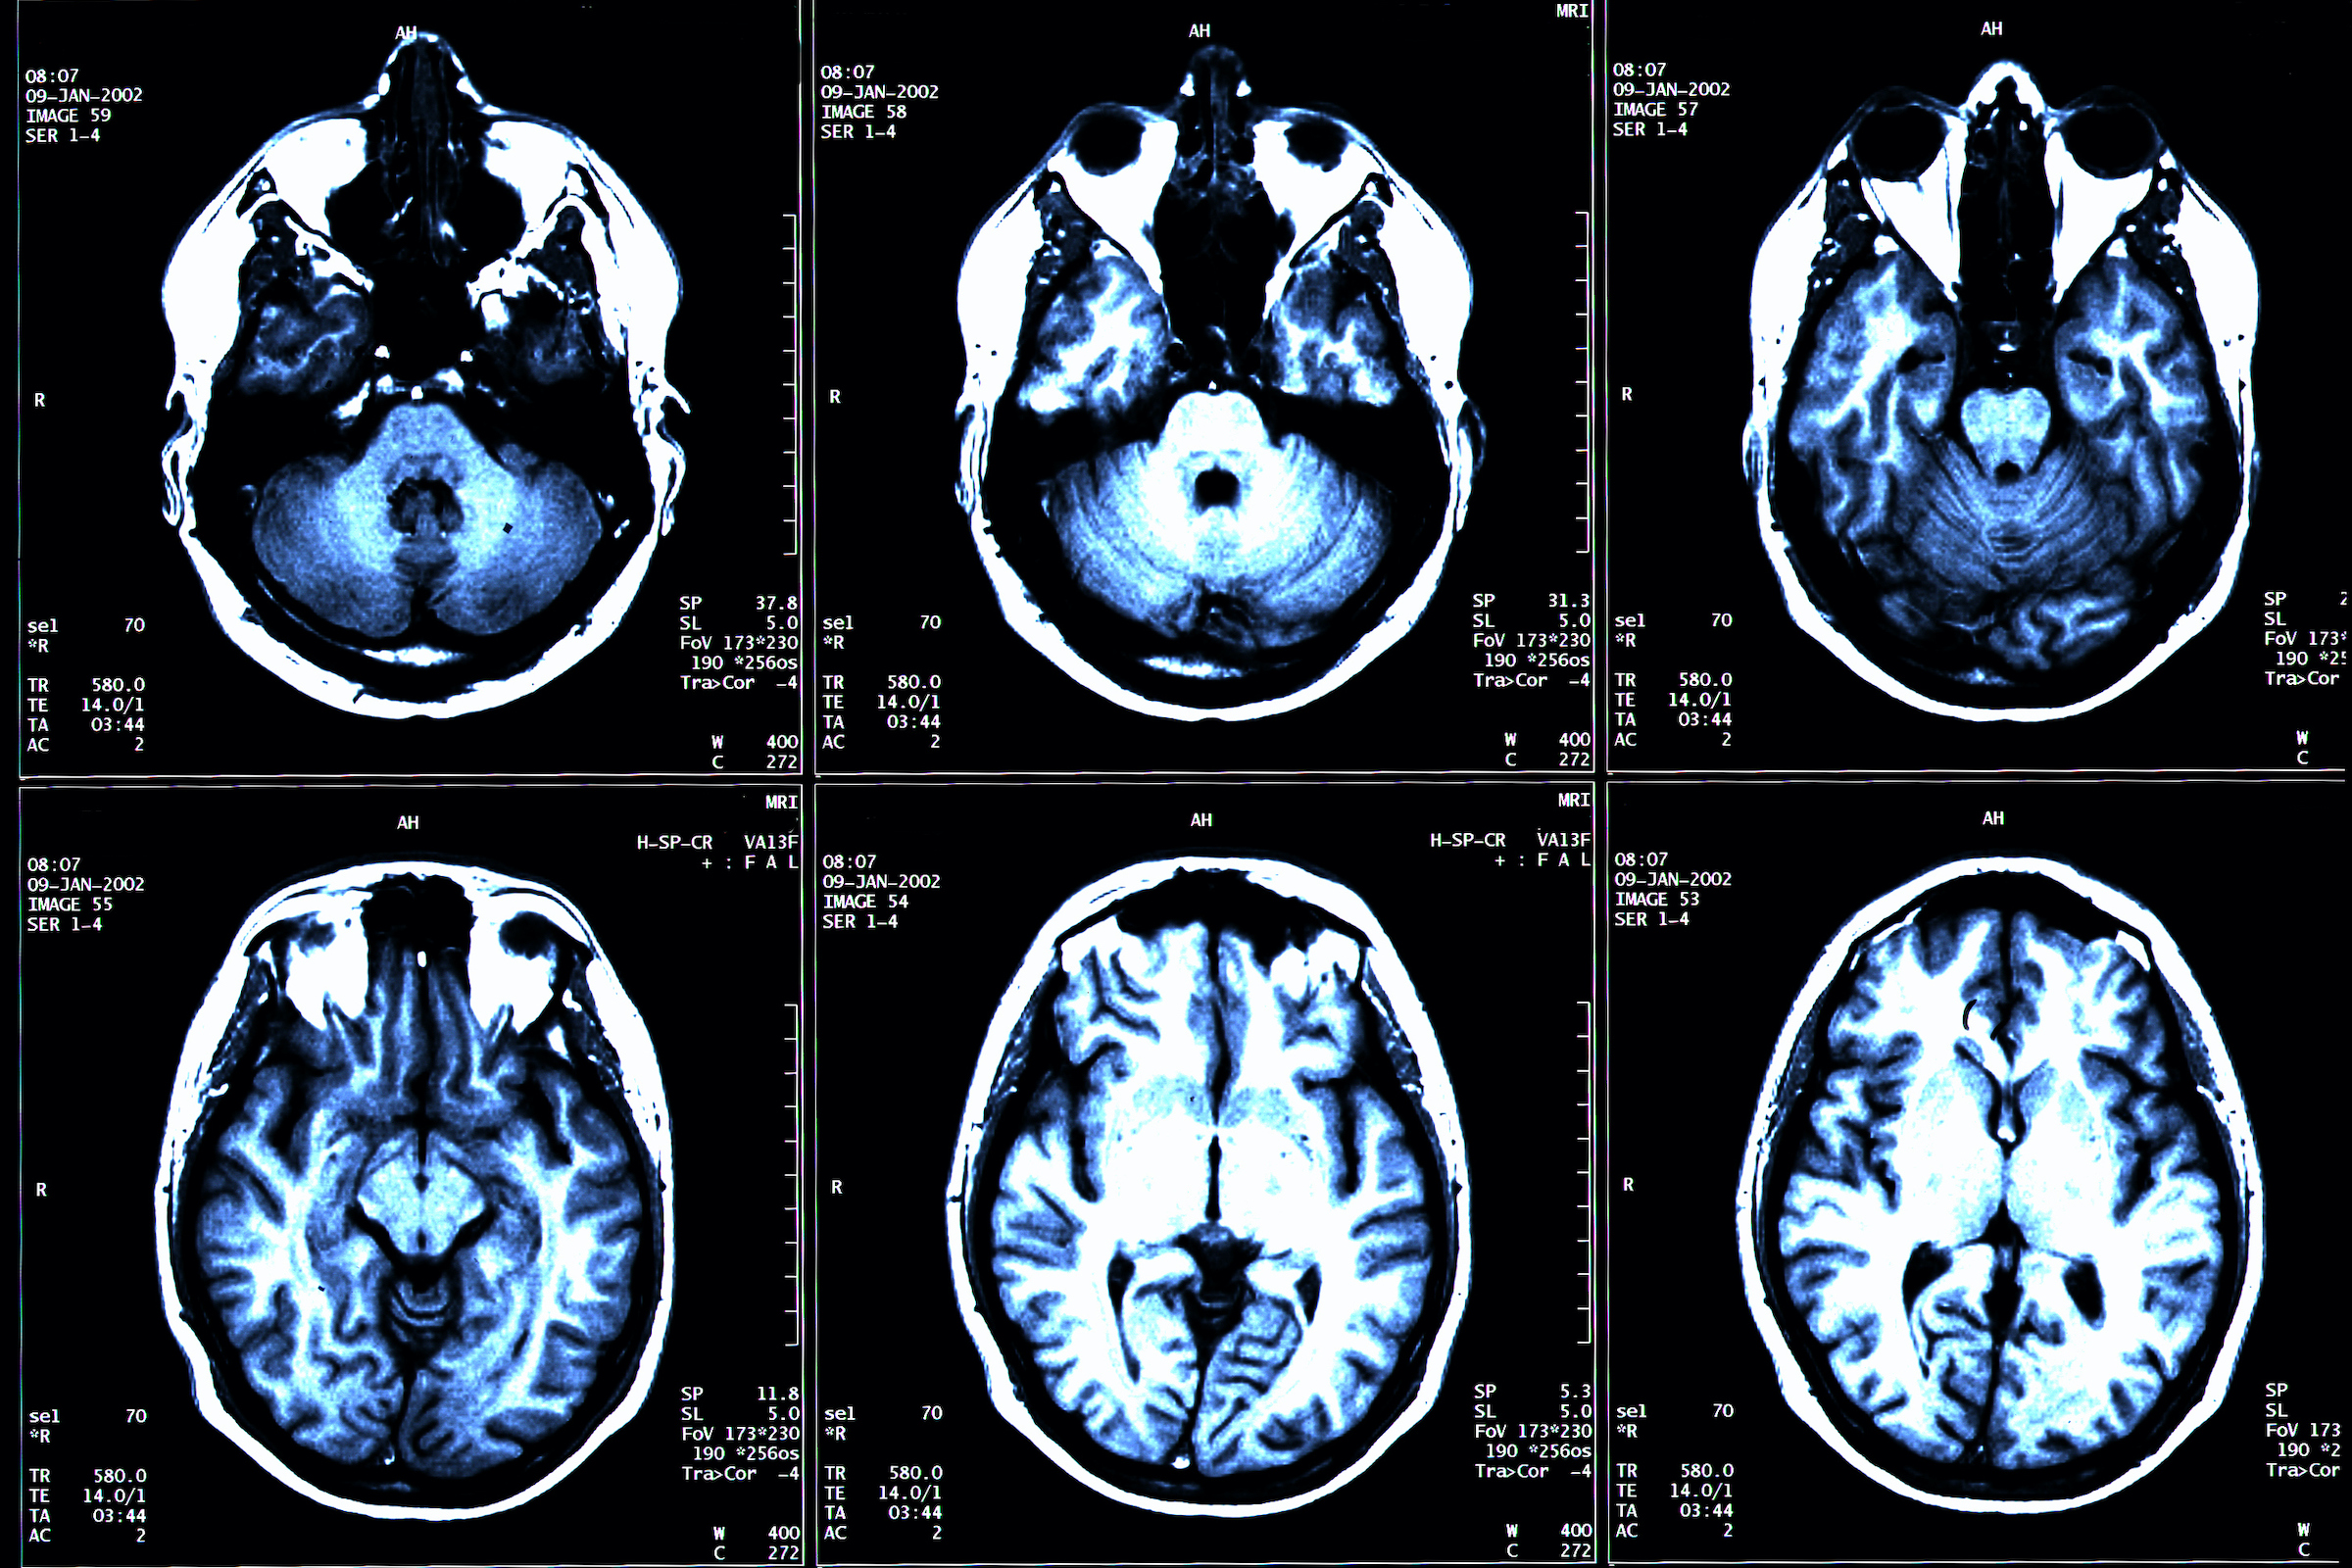 MS Brain Lesions and Their Effects